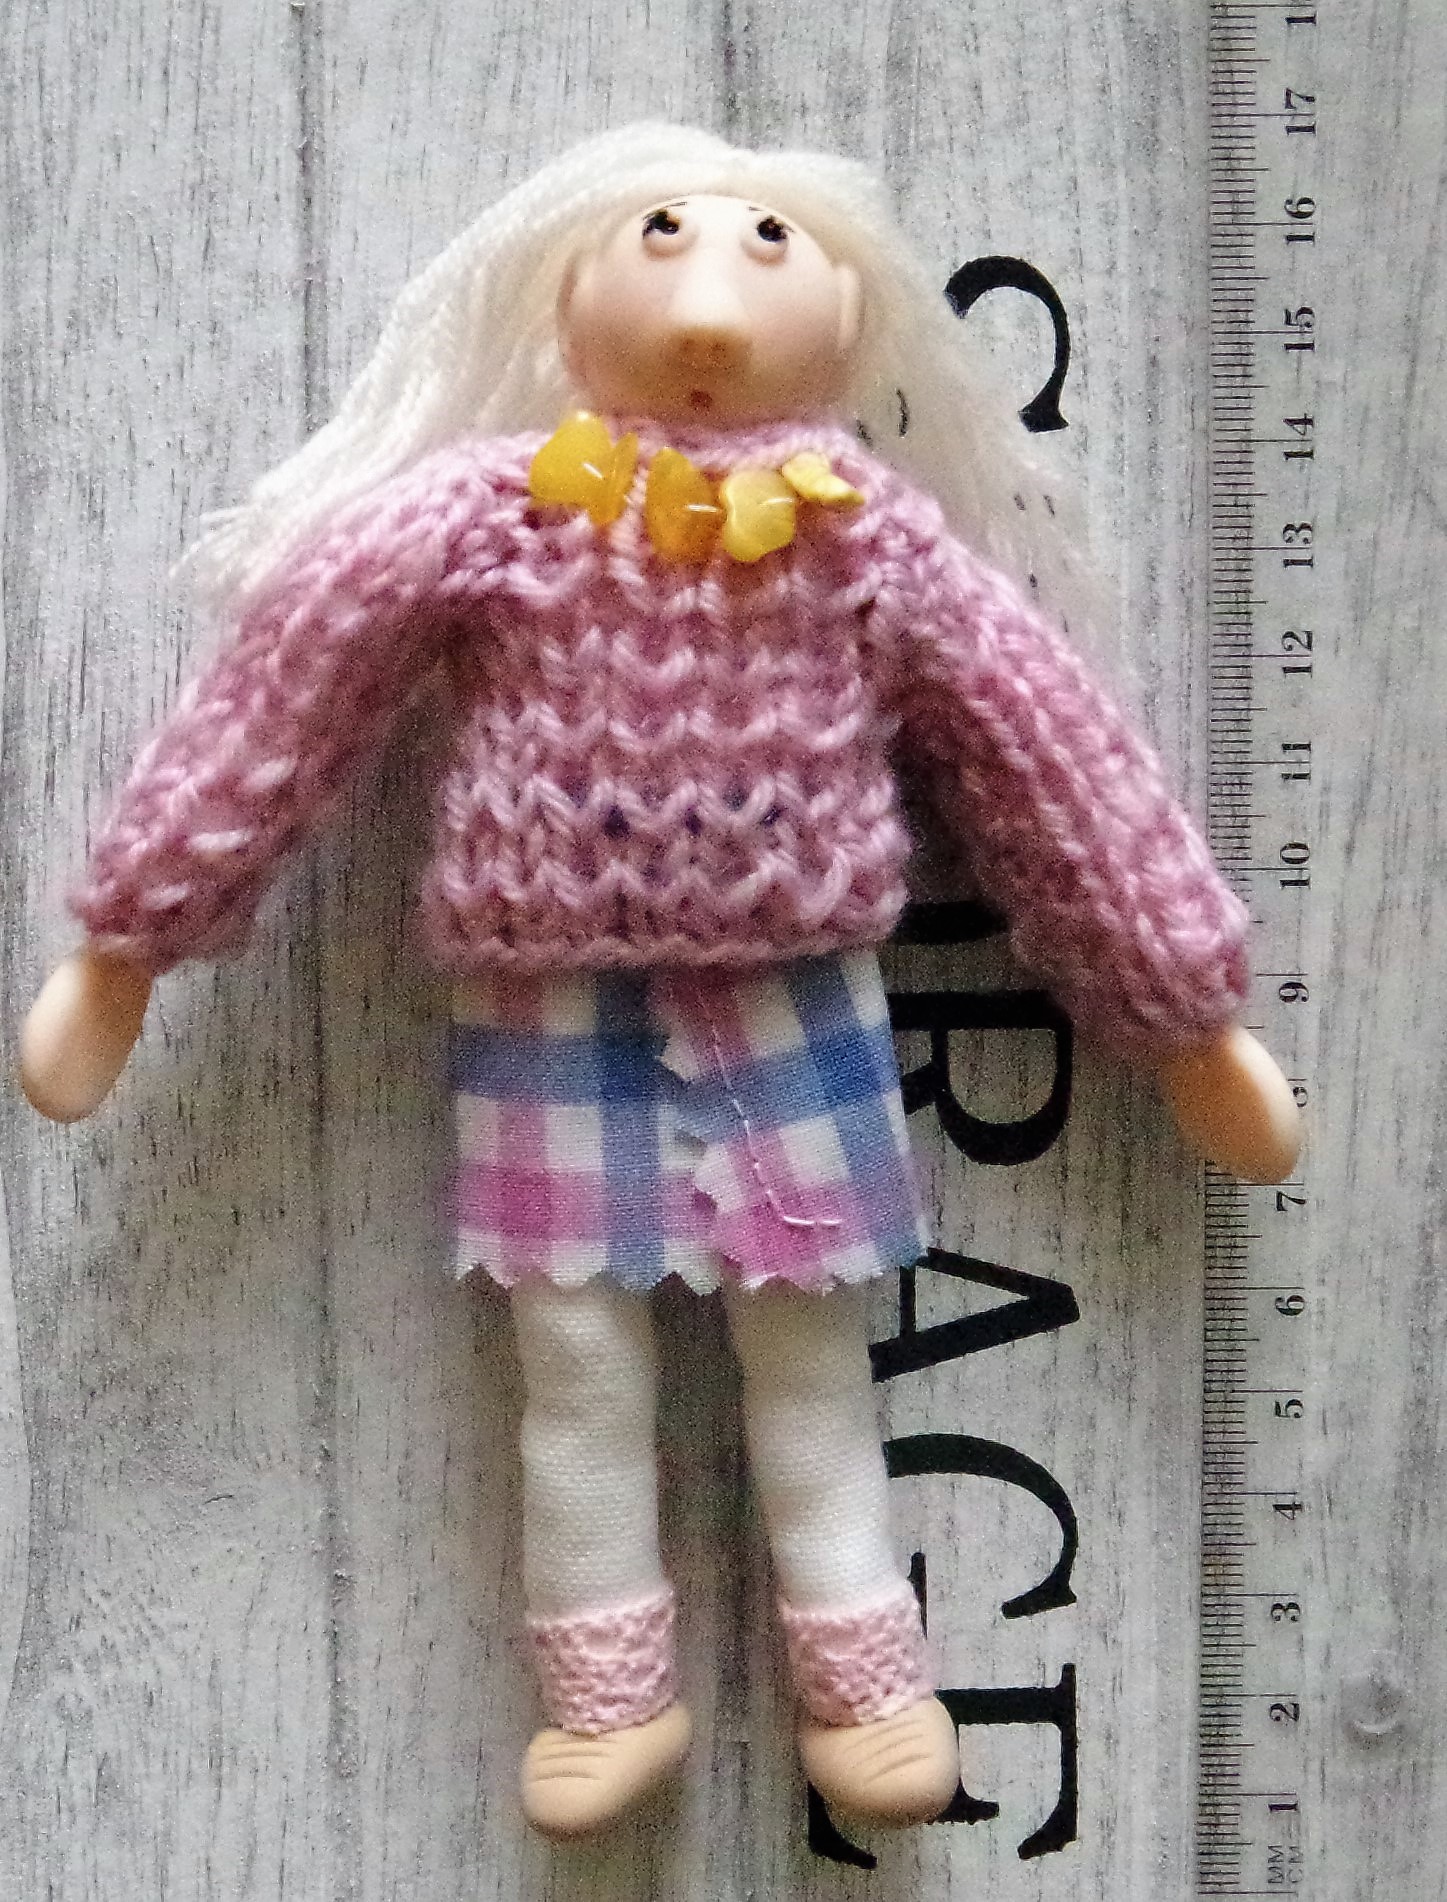 A rag doll 17 cm. With a head, hands and shoes made of modelling clay.